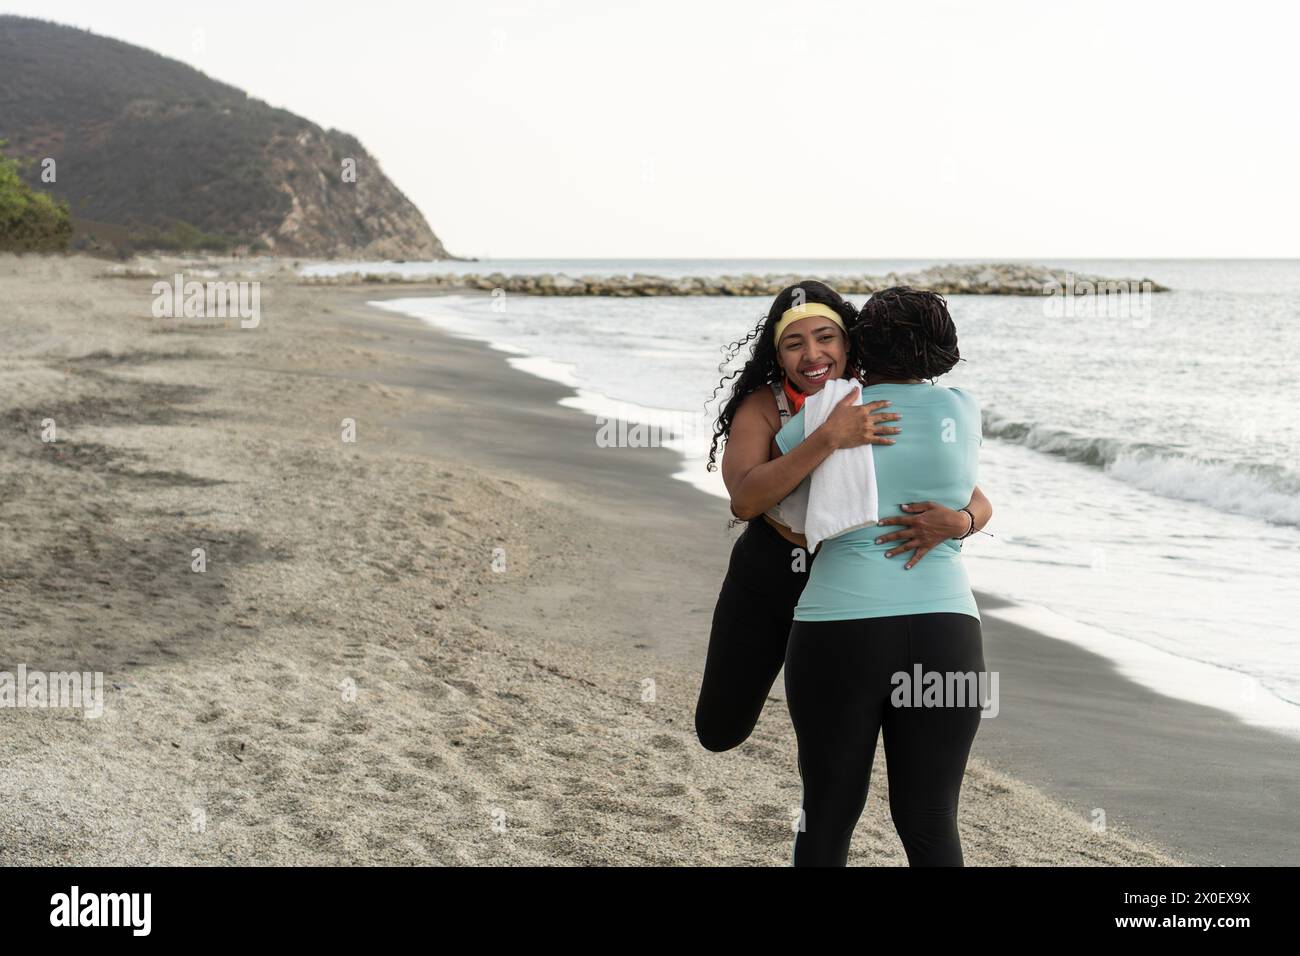 Two women embrace joyfully on a quiet beach, waves gently lapping the shore. Stock Photo